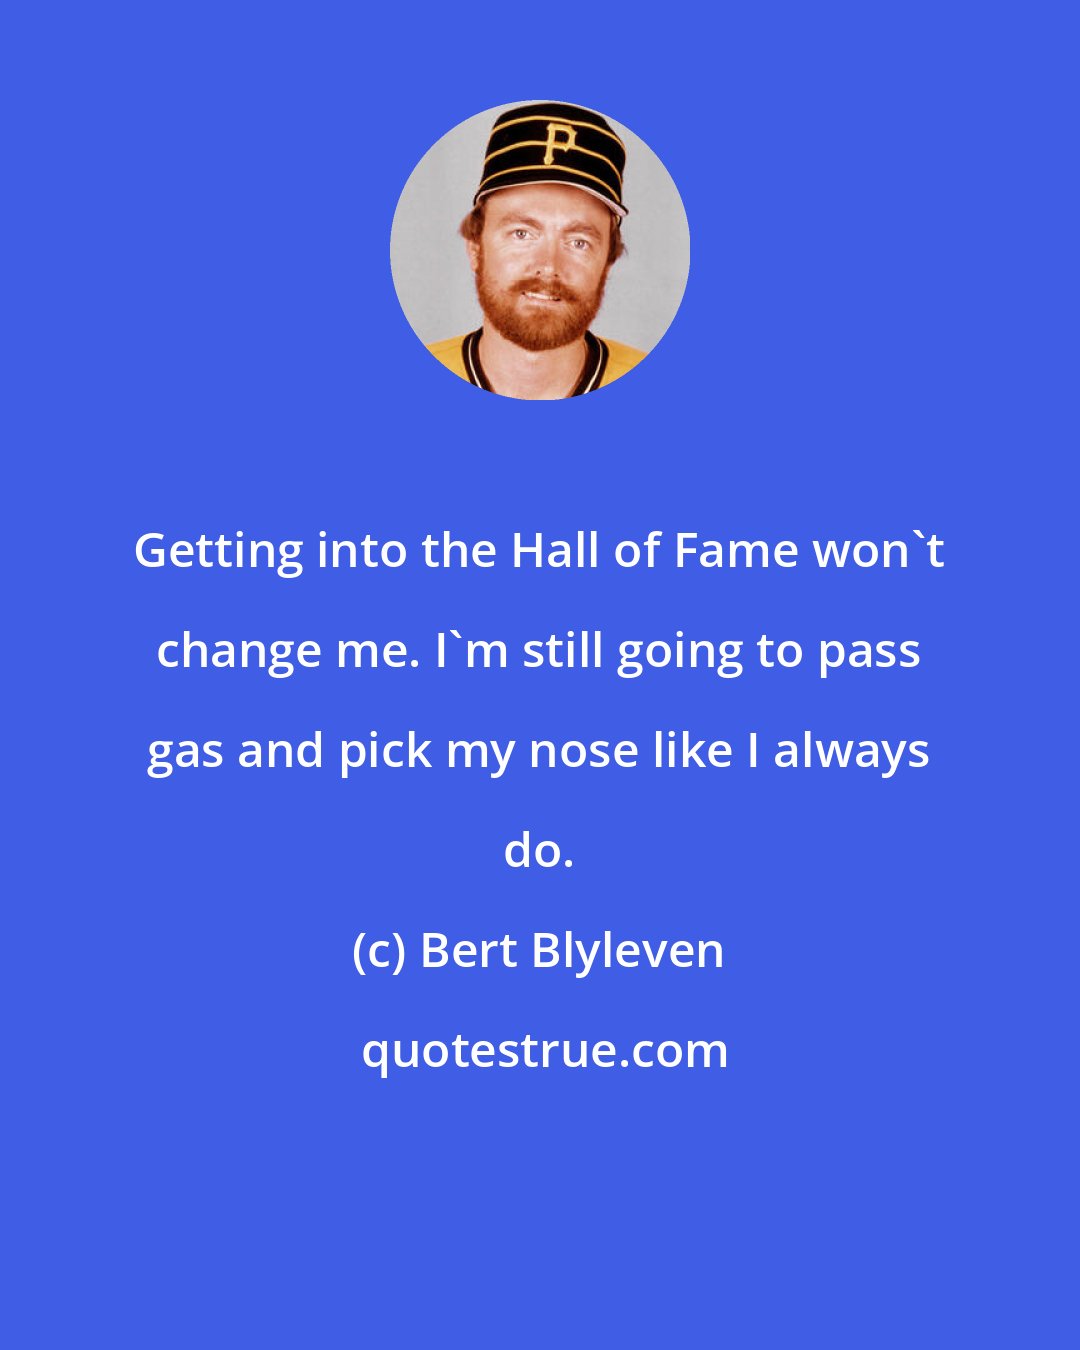 Bert Blyleven: Getting into the Hall of Fame won't change me. I'm still going to pass gas and pick my nose like I always do.